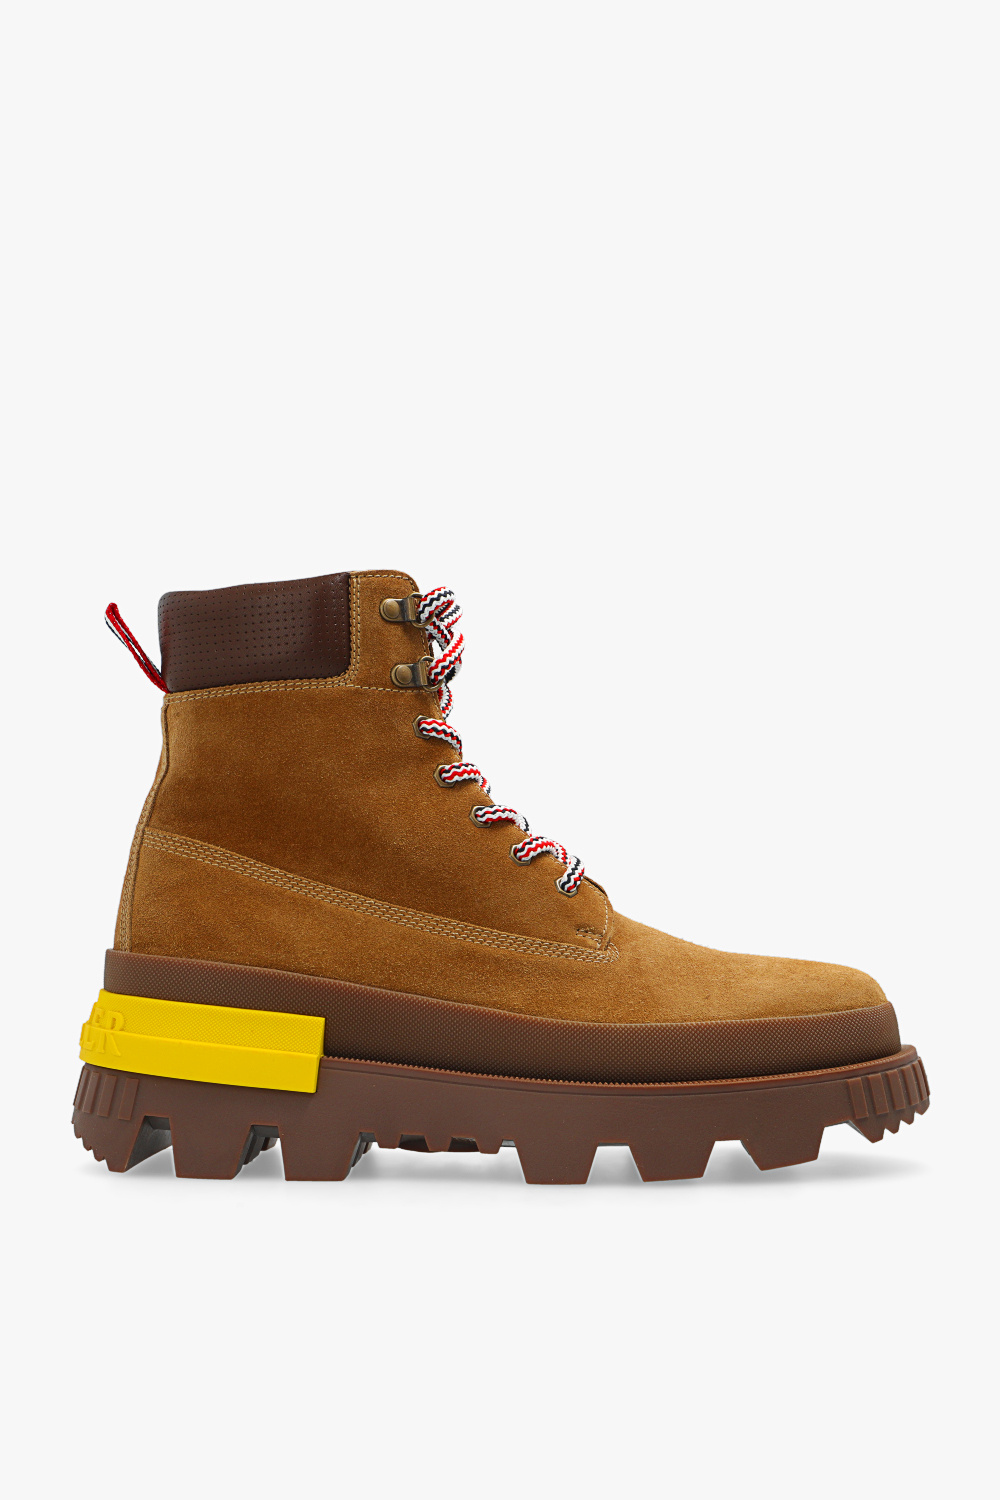 Moncler ‘Mon Corp’ leather boots